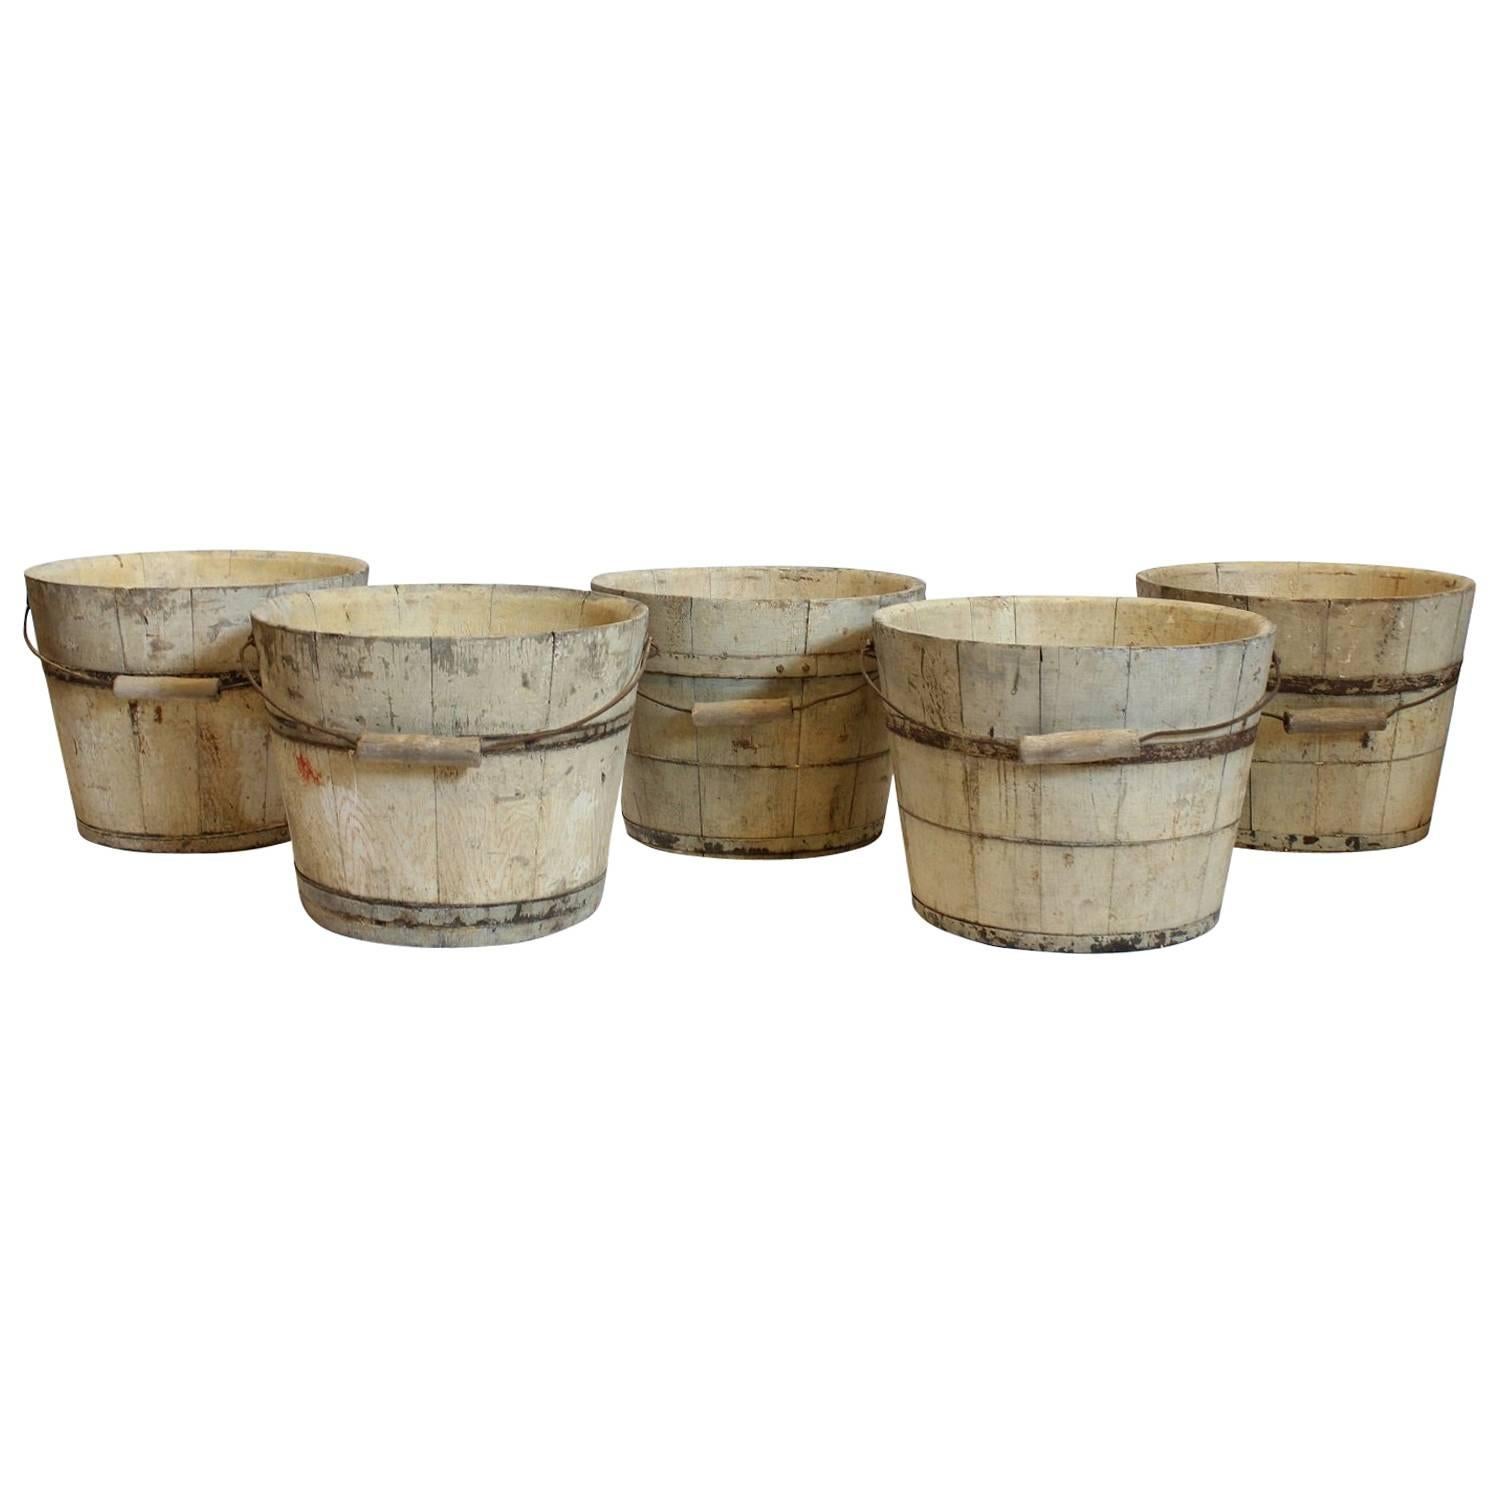 Collection of 1920s American Maple Syrup Wood Buckets For Sale